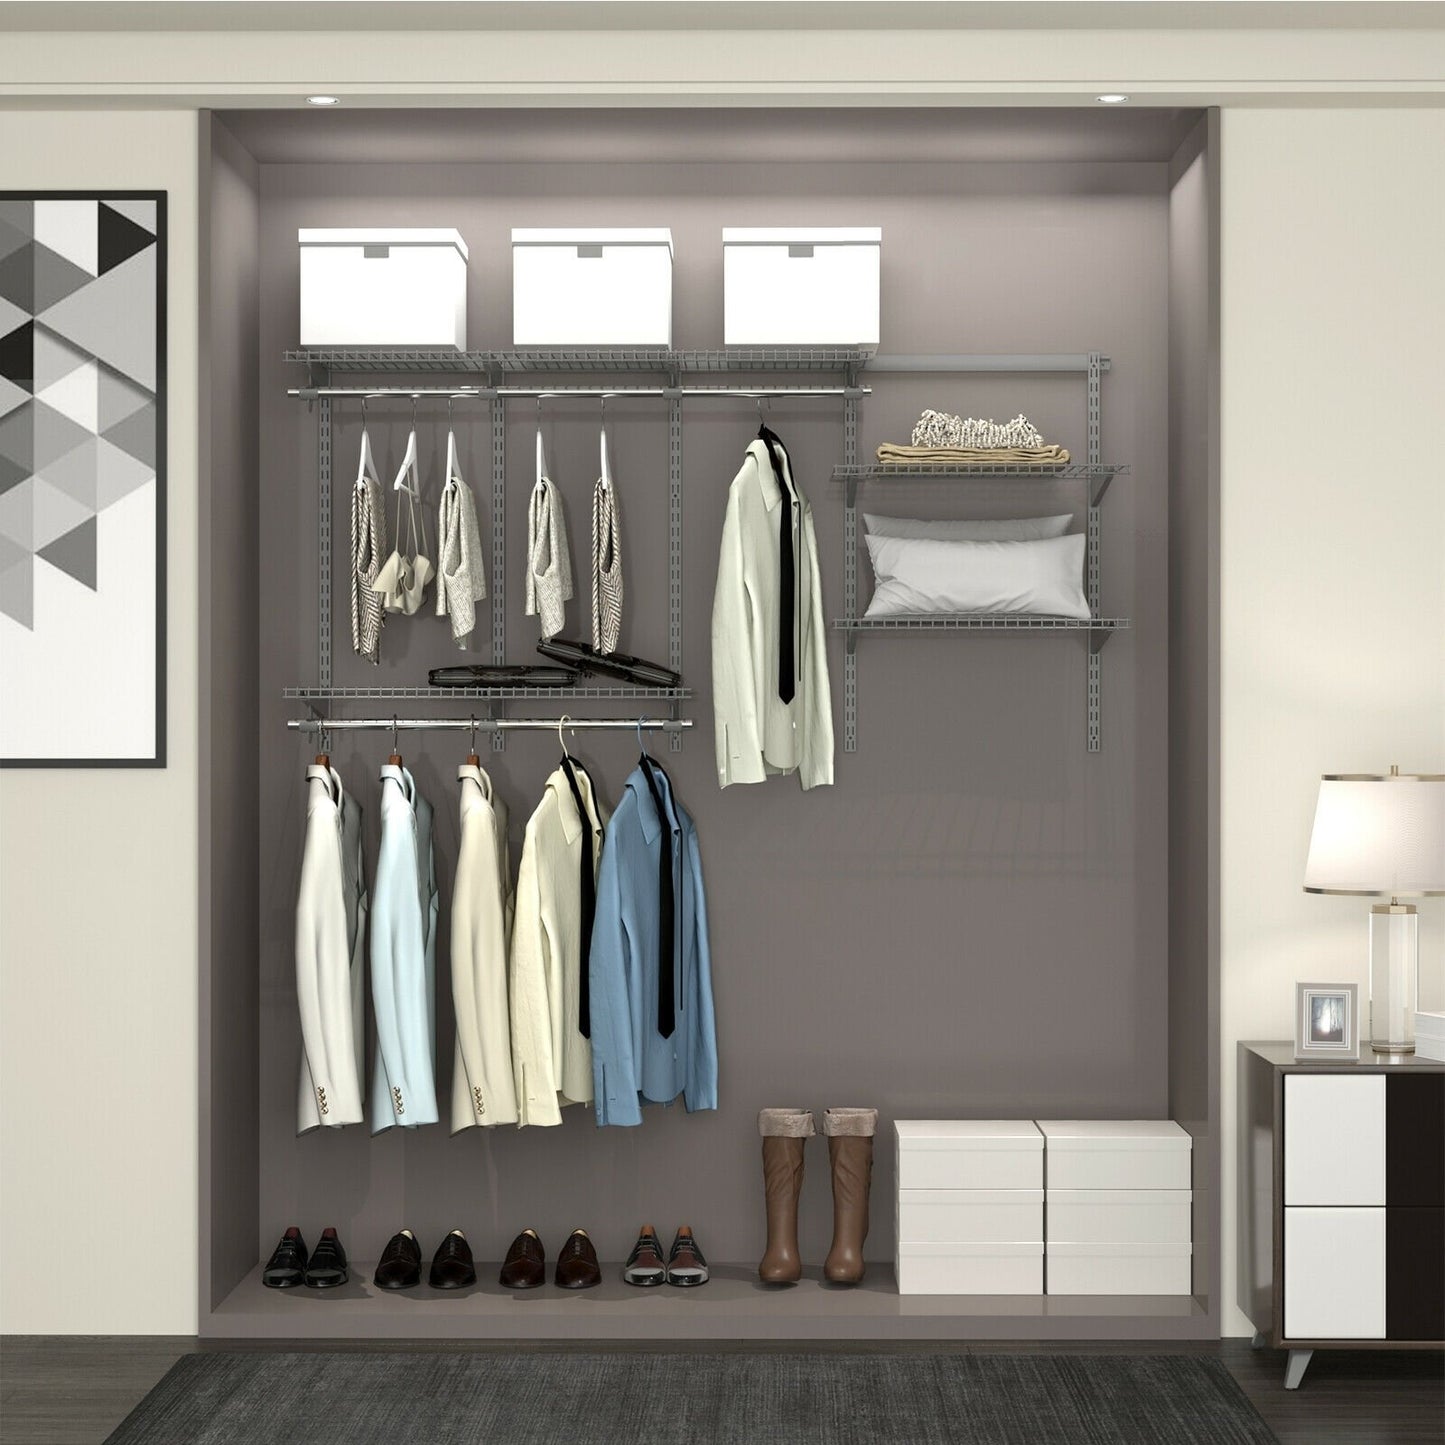 3 to 6 Feet Wall-Mounted Closet System Organizer Kit with Hang Rod, Gray